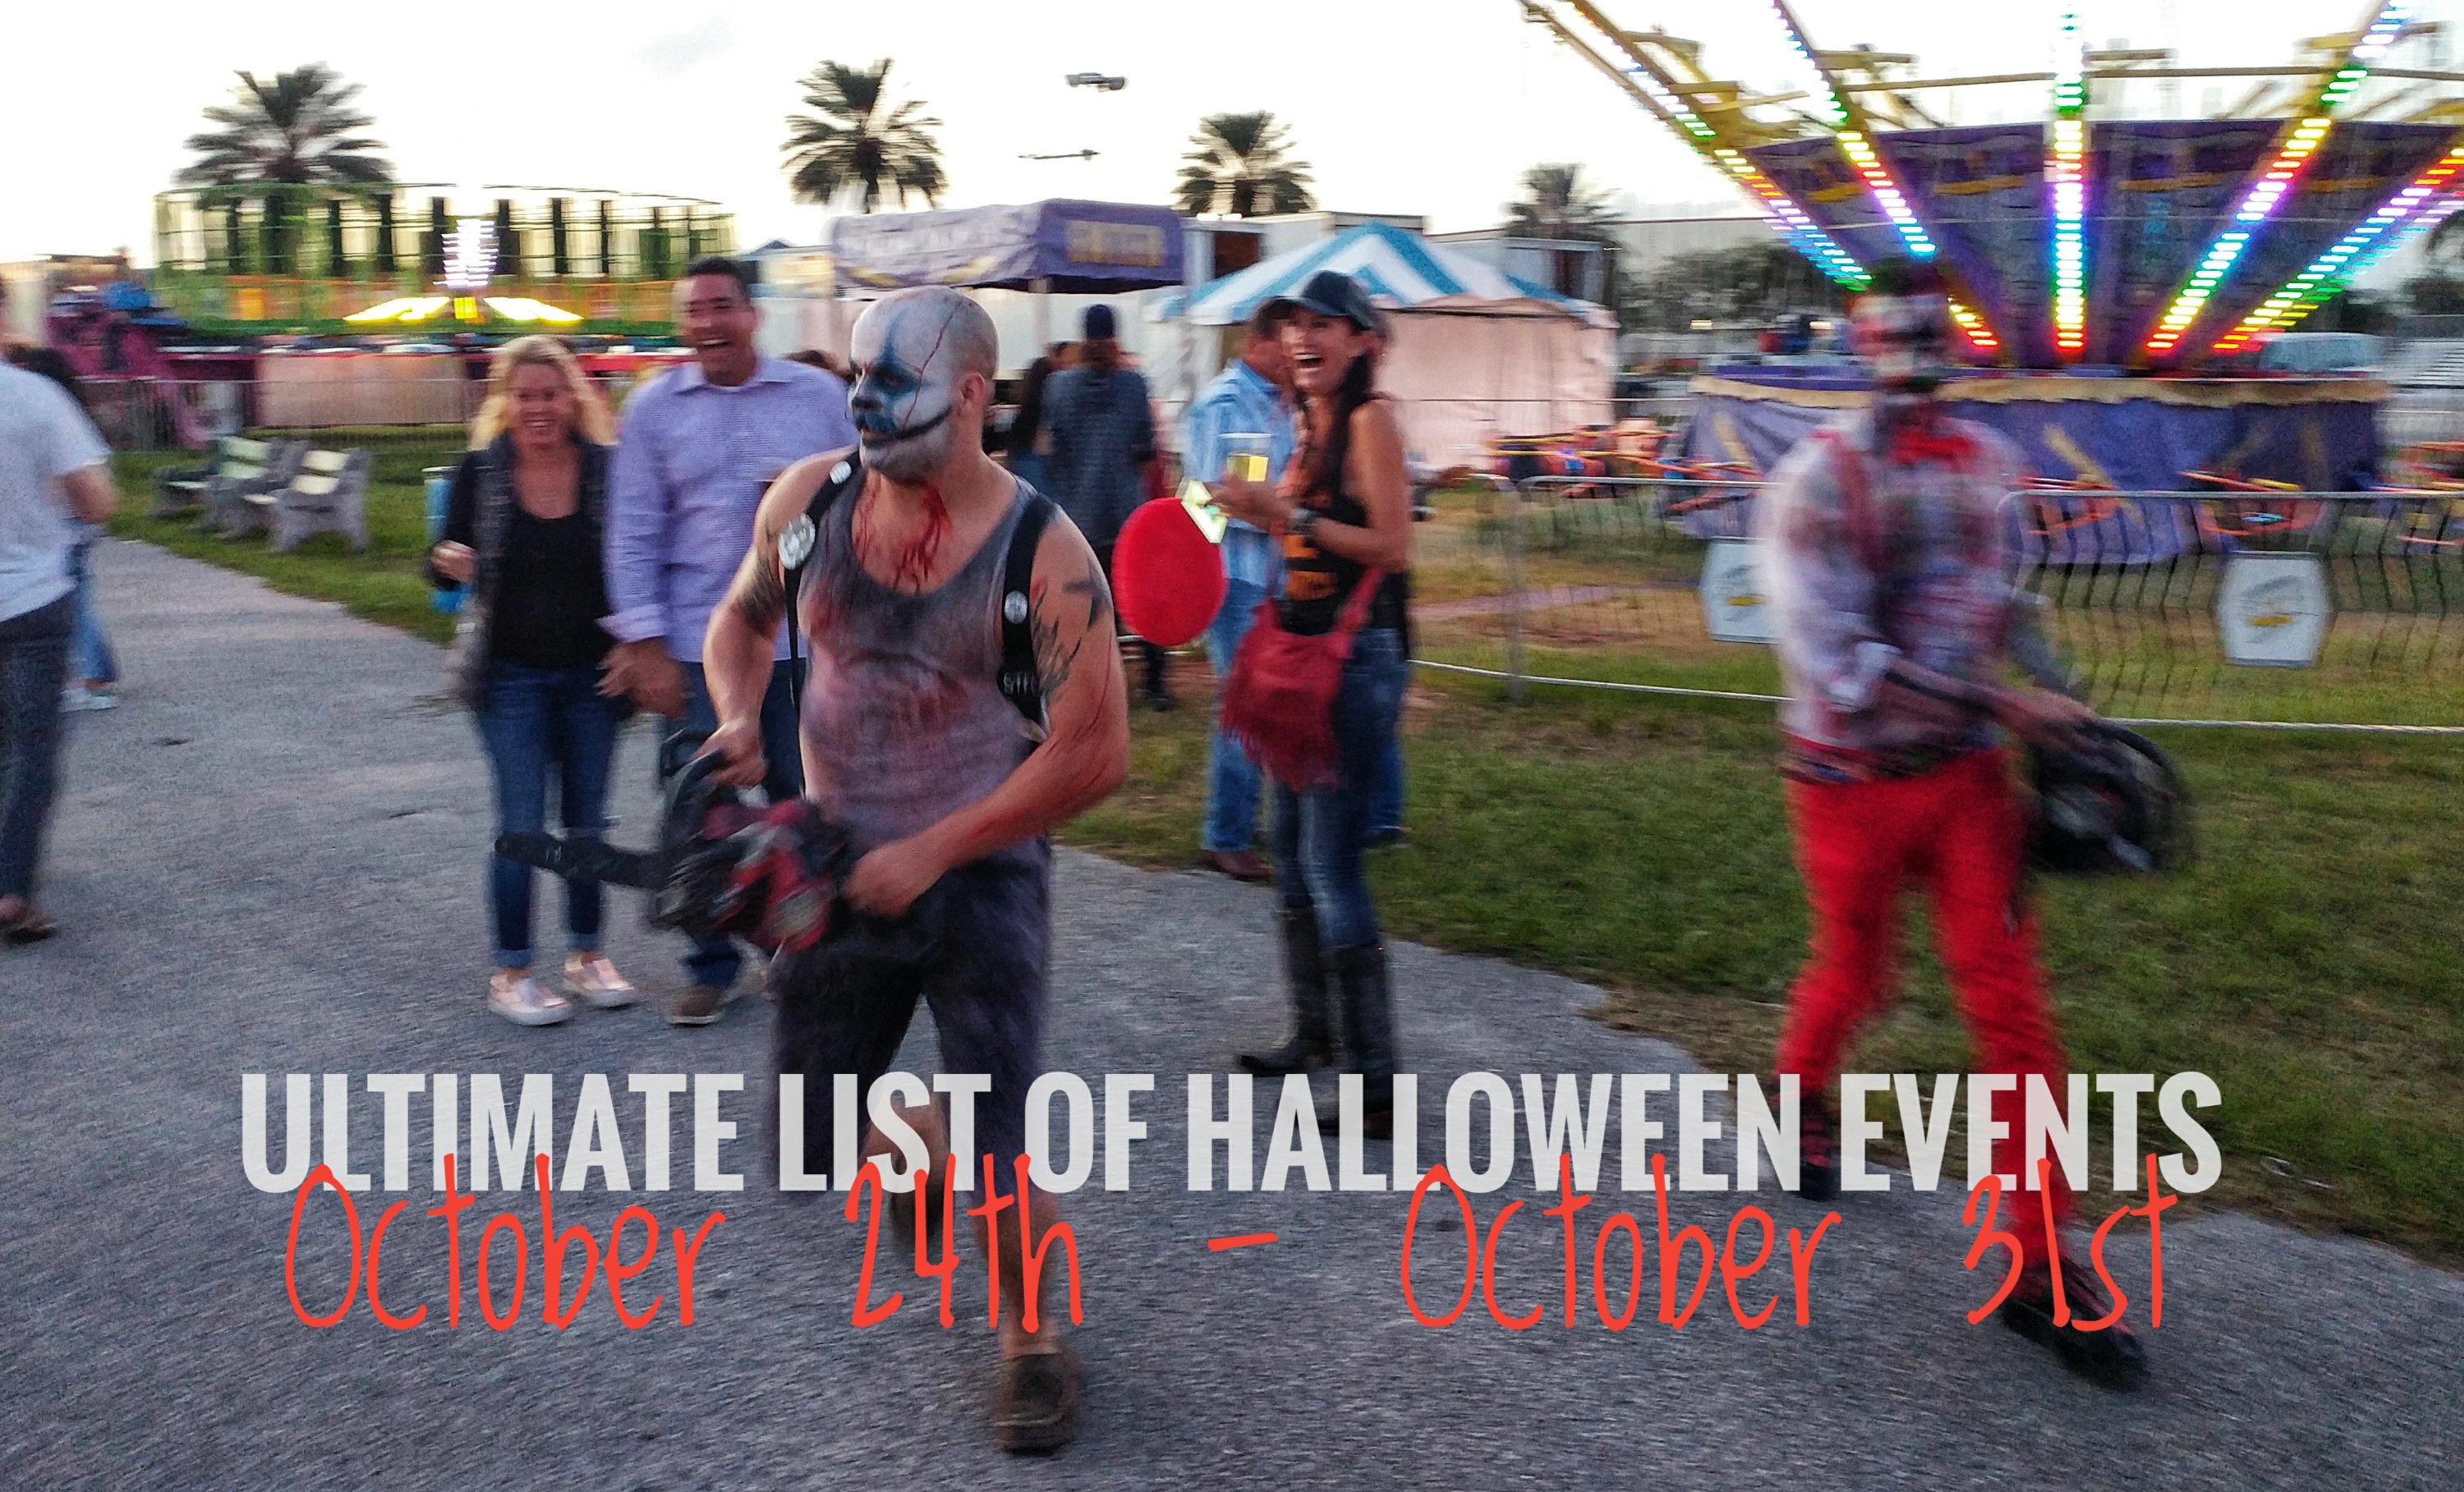 Ultimate list of Halloween events – week of October 24th – 31st